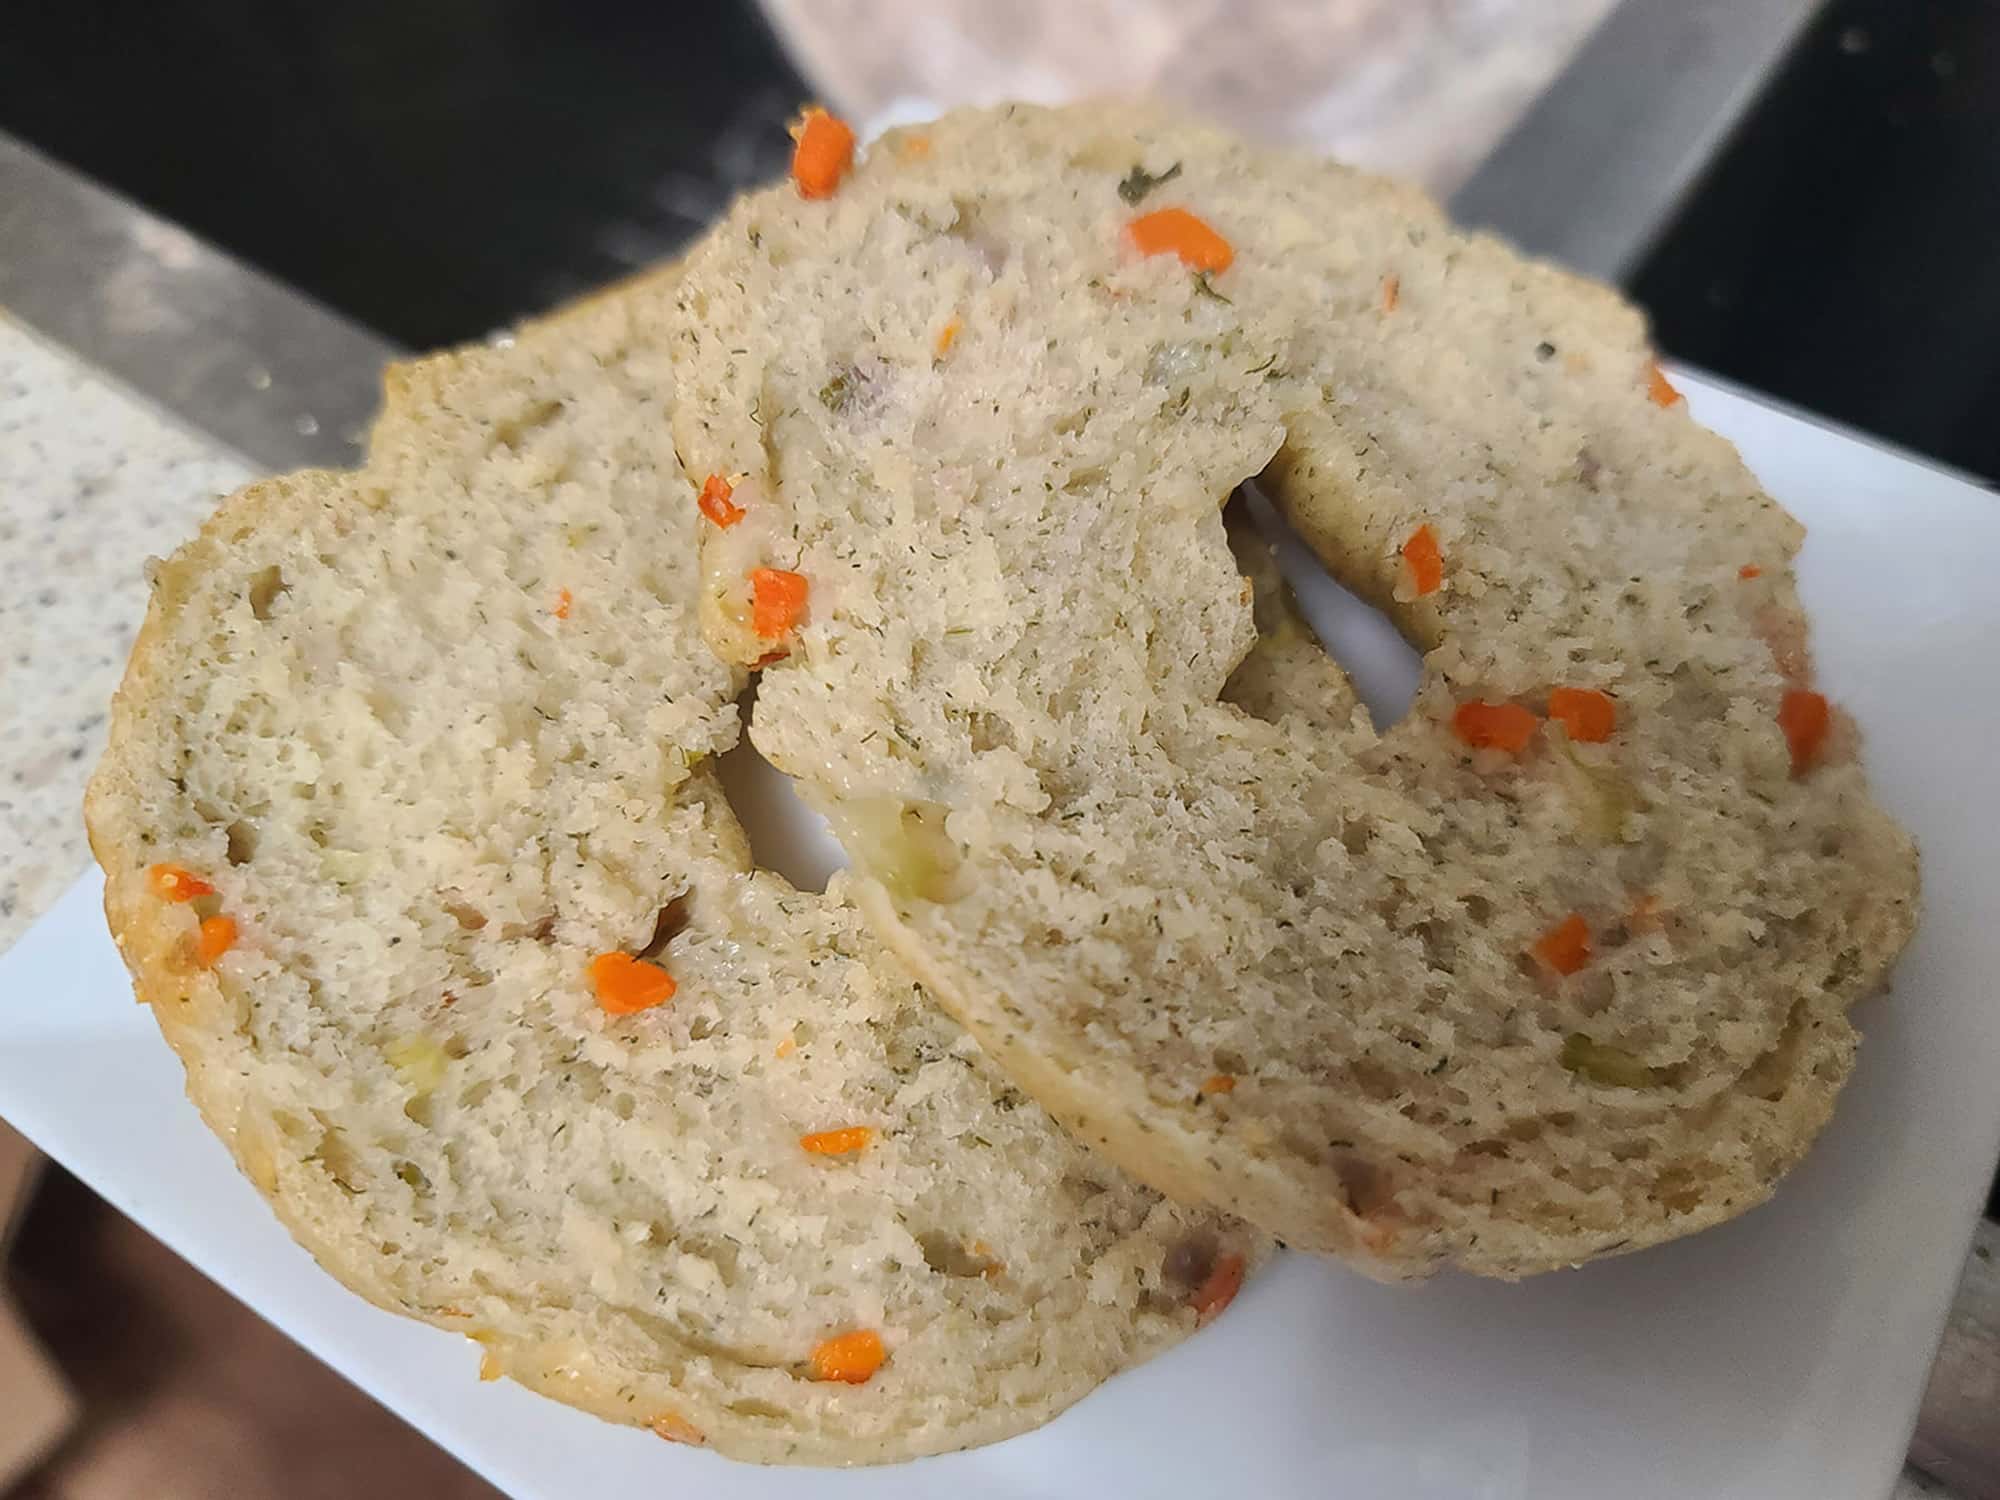 A close up few of a cut open vegetable bagel.  the herbs and pieces of vegetables can be clearly seen throughout.